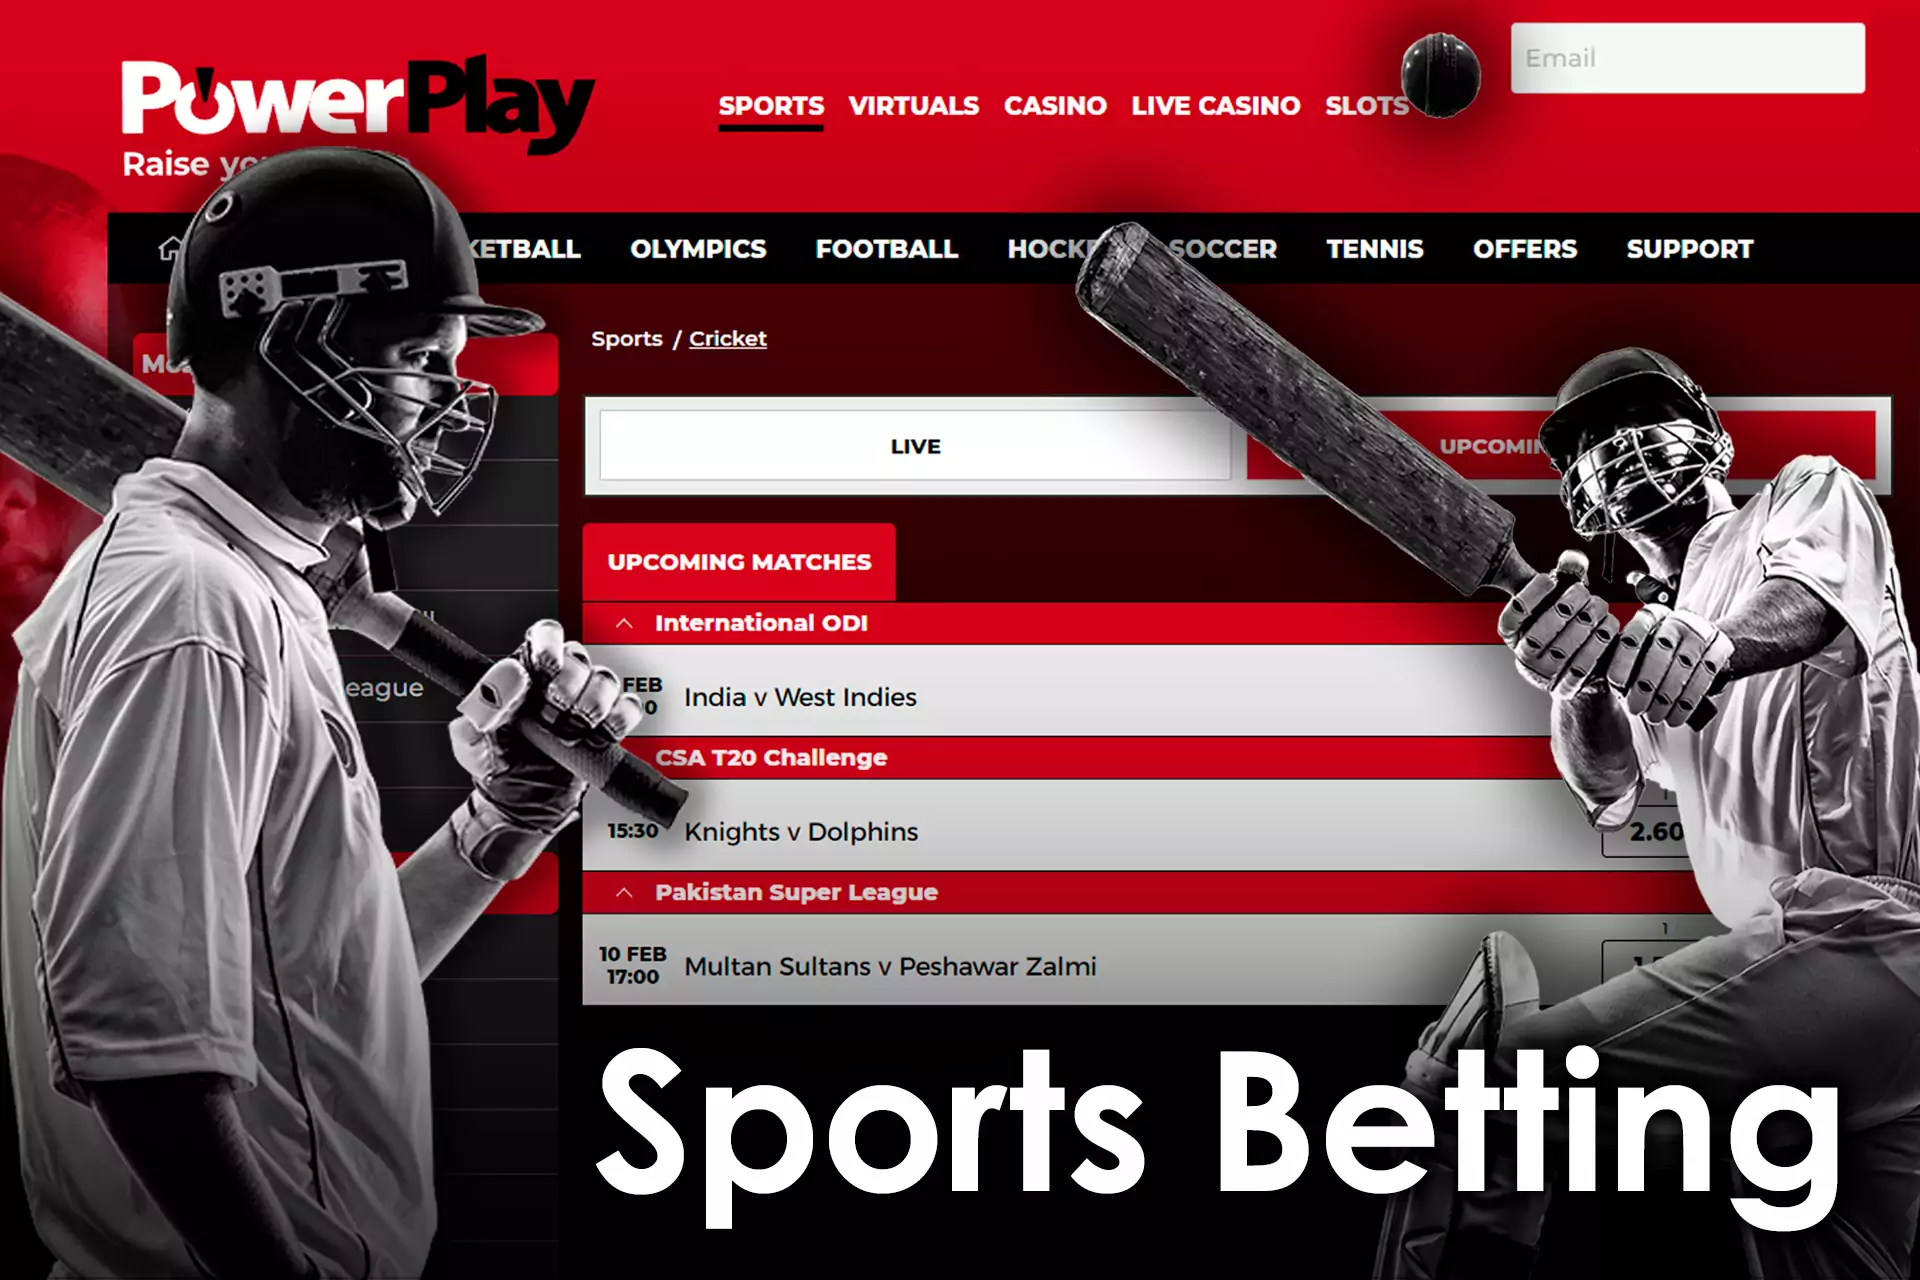 In the sports section, you can place bets on the most popular events.